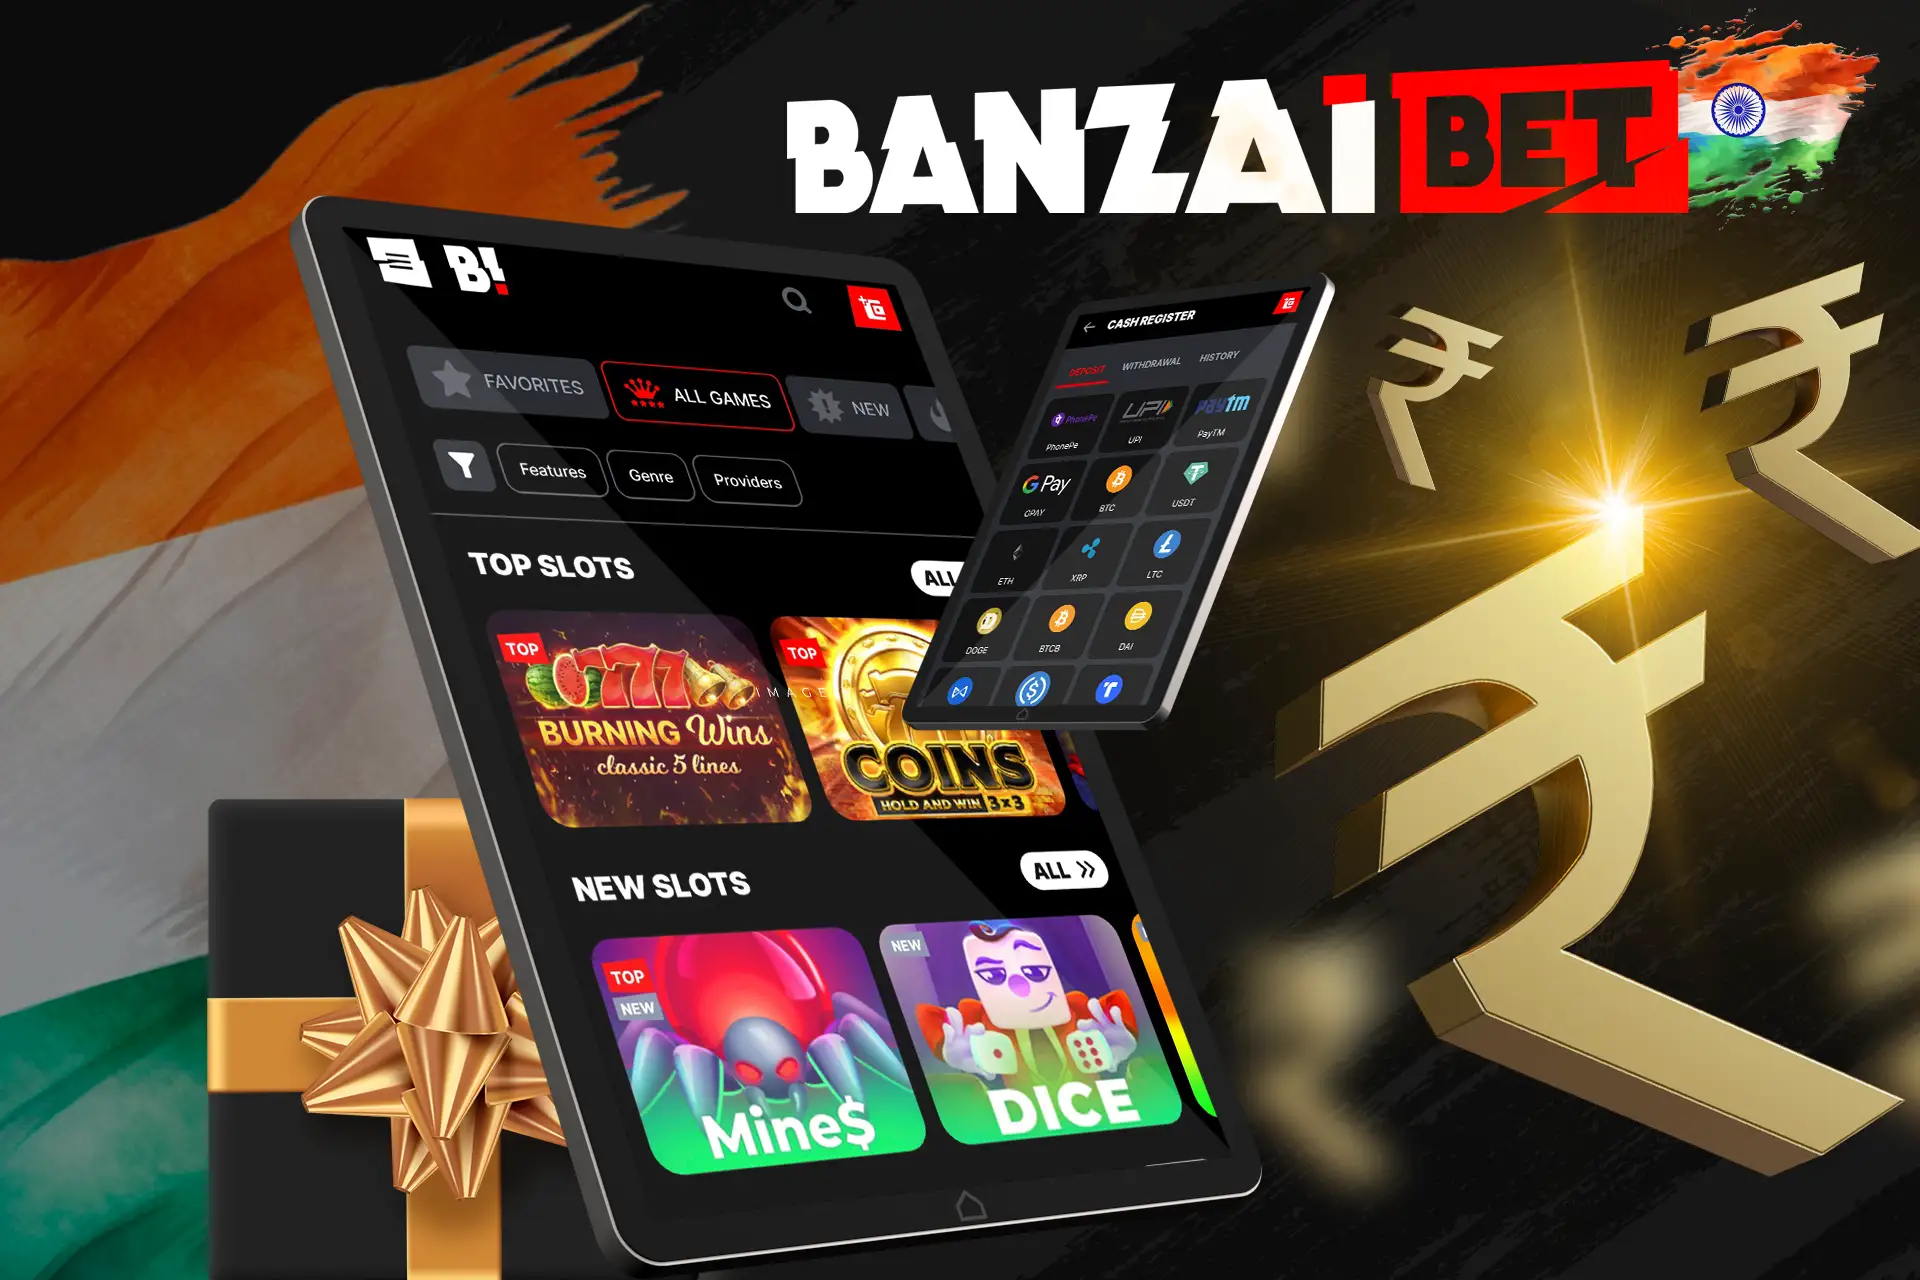 Check out Banzaibet India payment methods and get your starting bonus